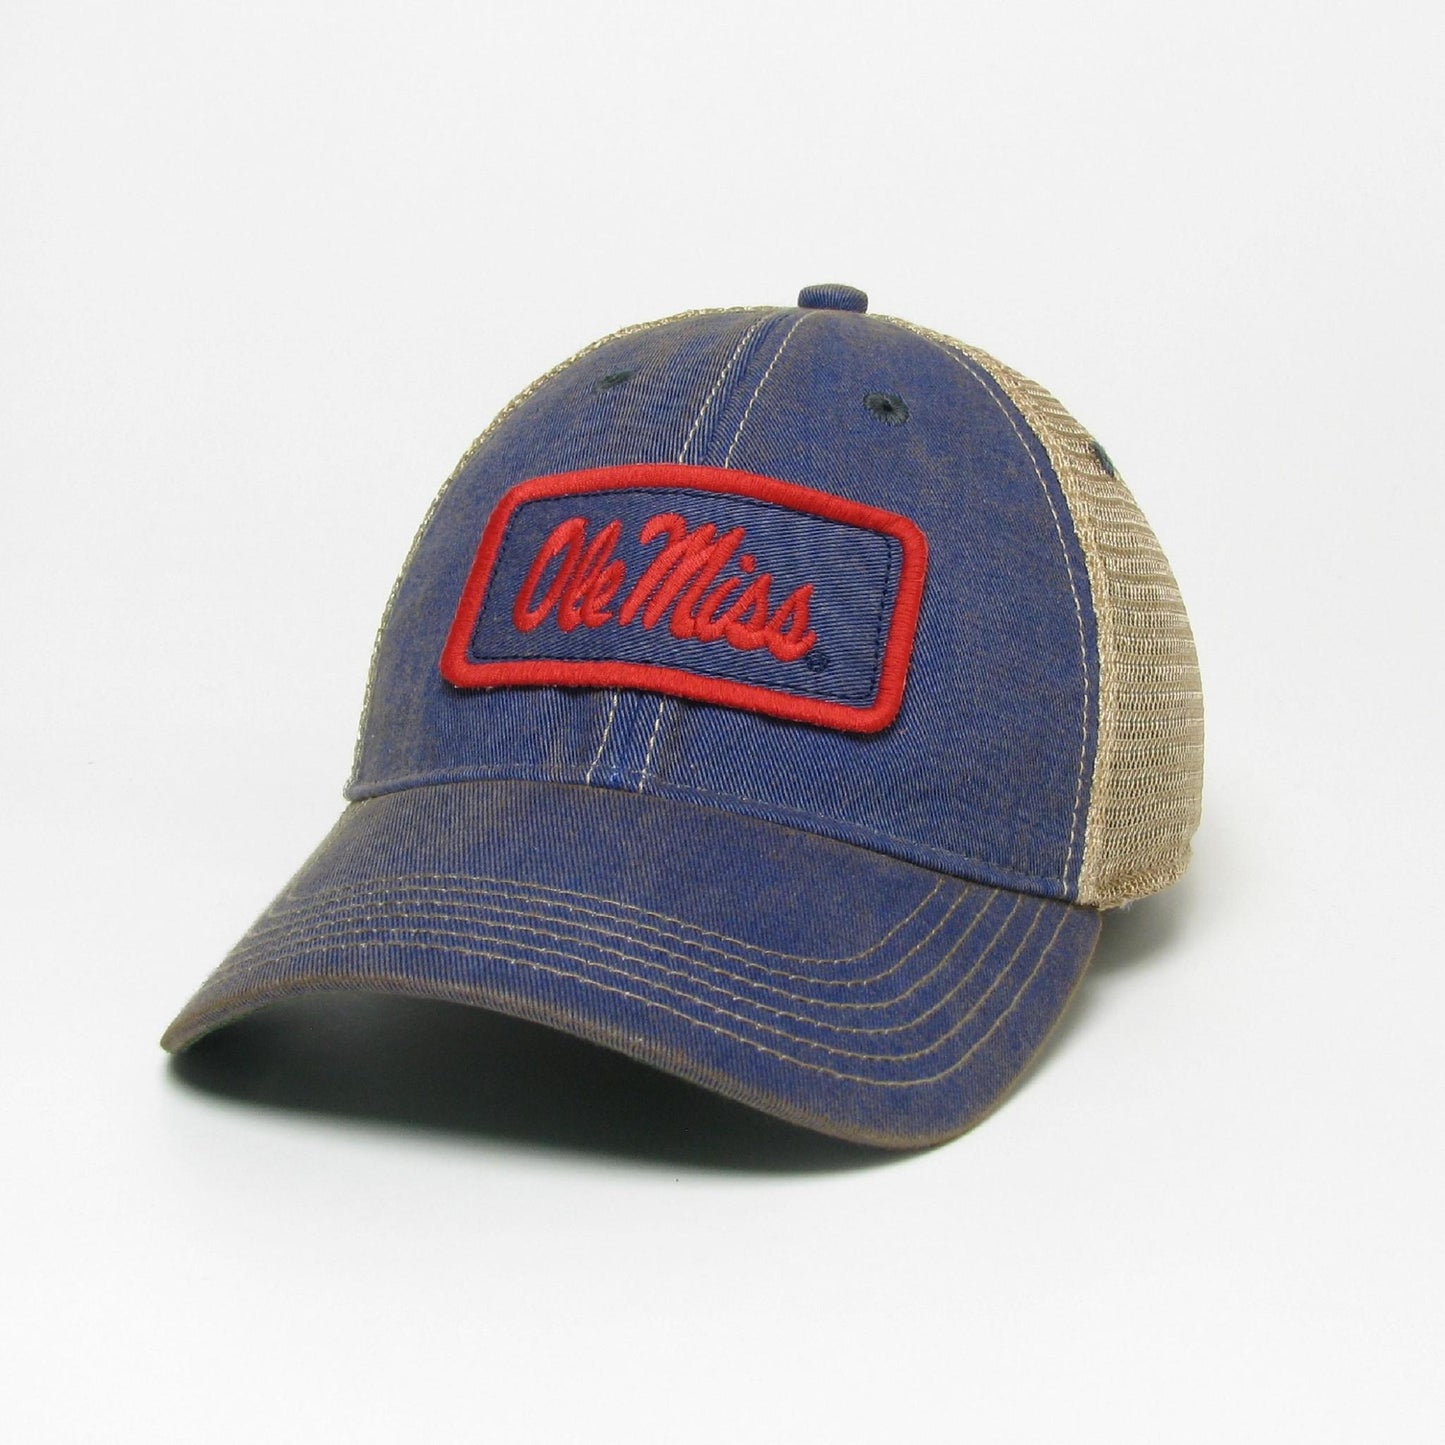 Legacy Old Favorite Trucker Cap- Blue Jean with State of MS Design